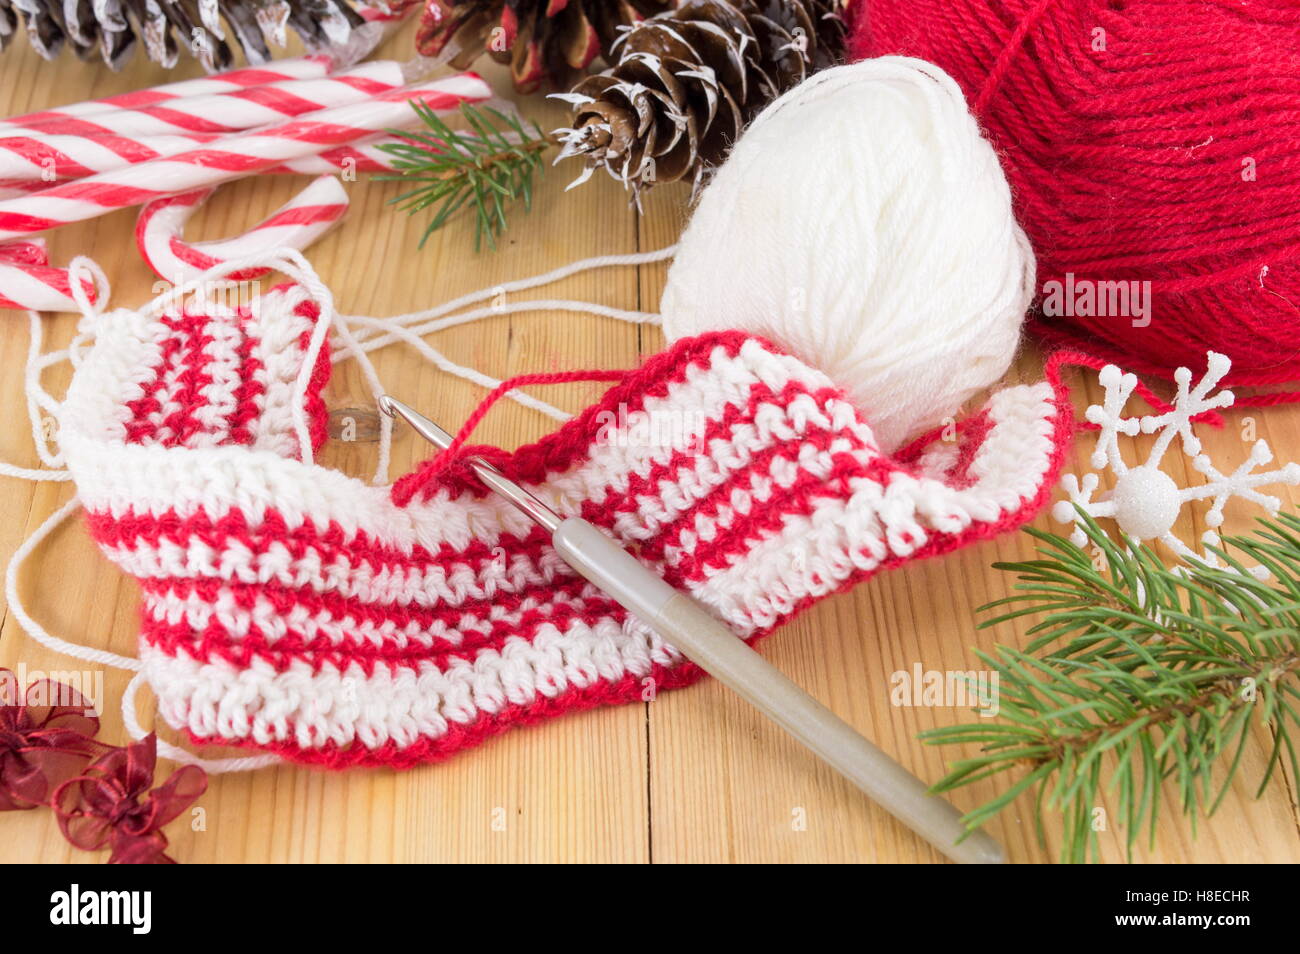 Crocheting Christmas winter red and white sweater Stock Photo